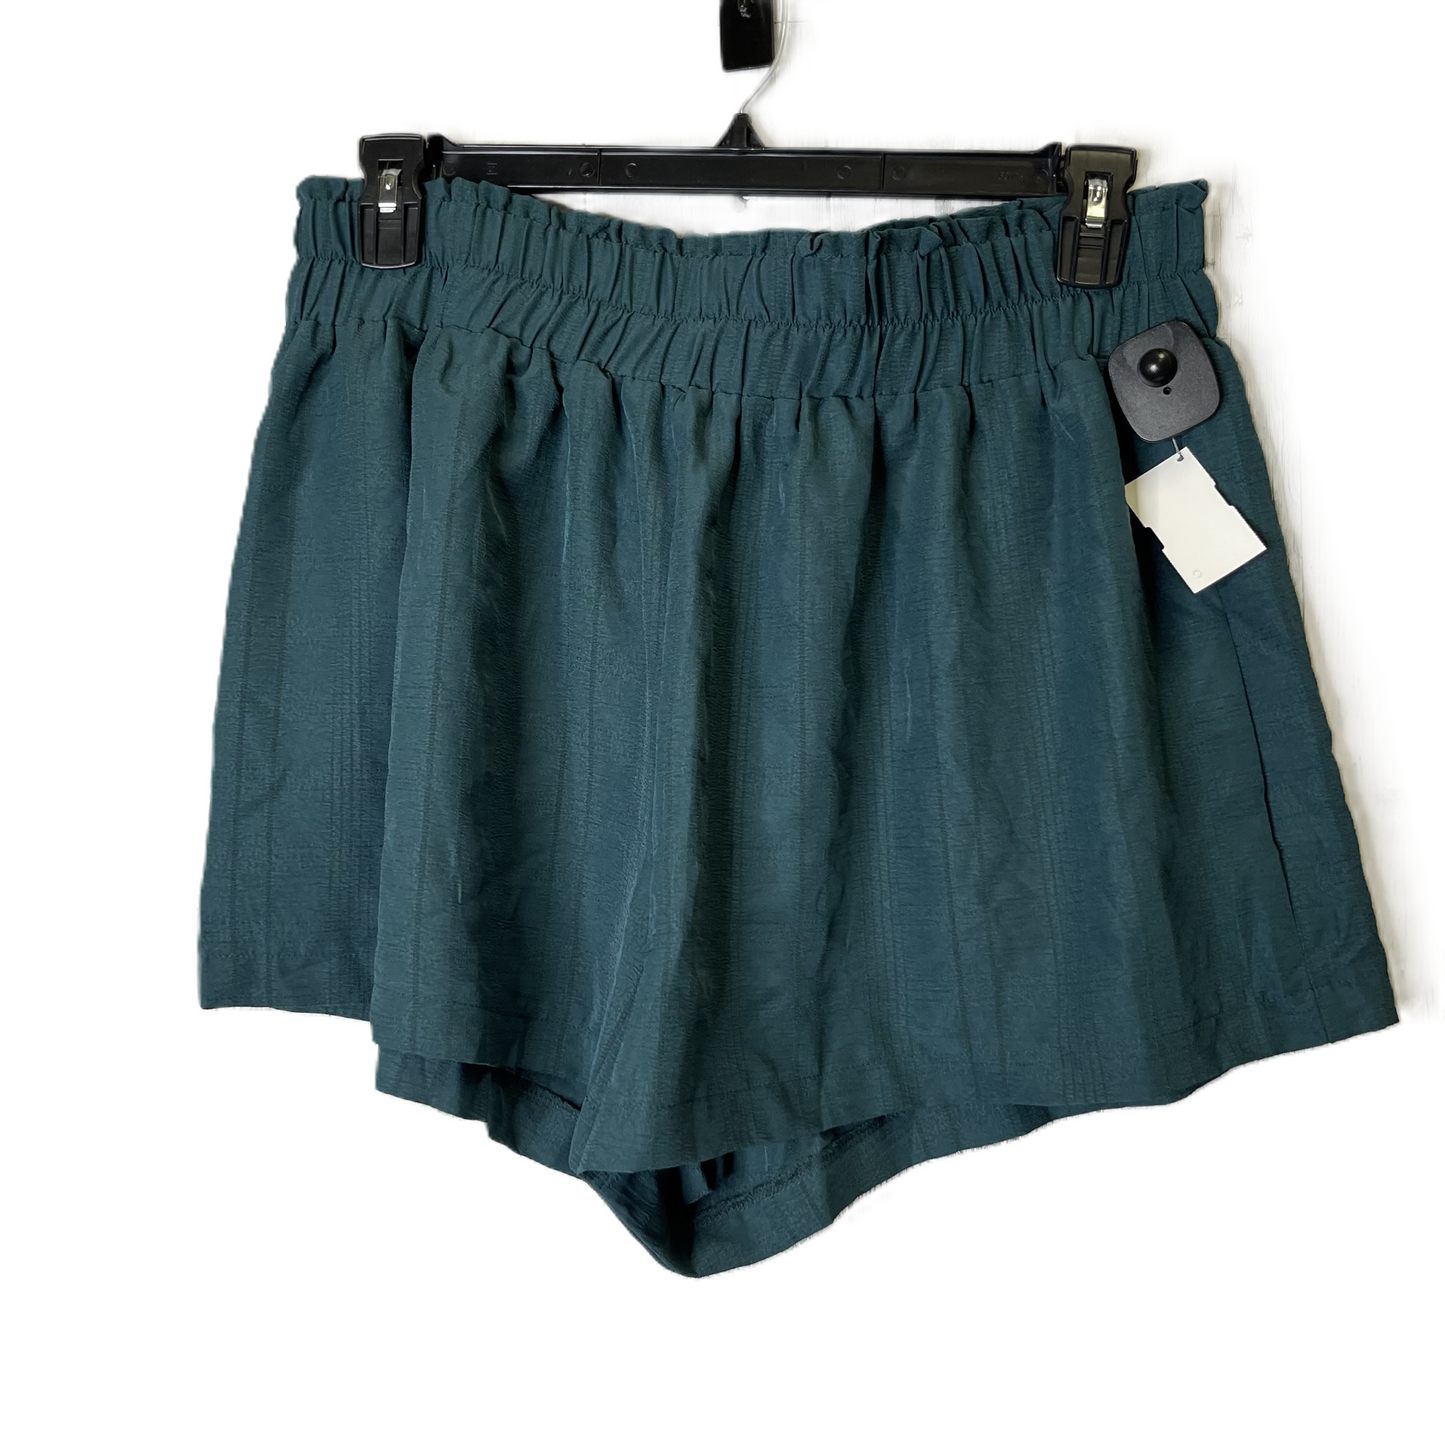 Teal Shorts By Shein, Size: 2x